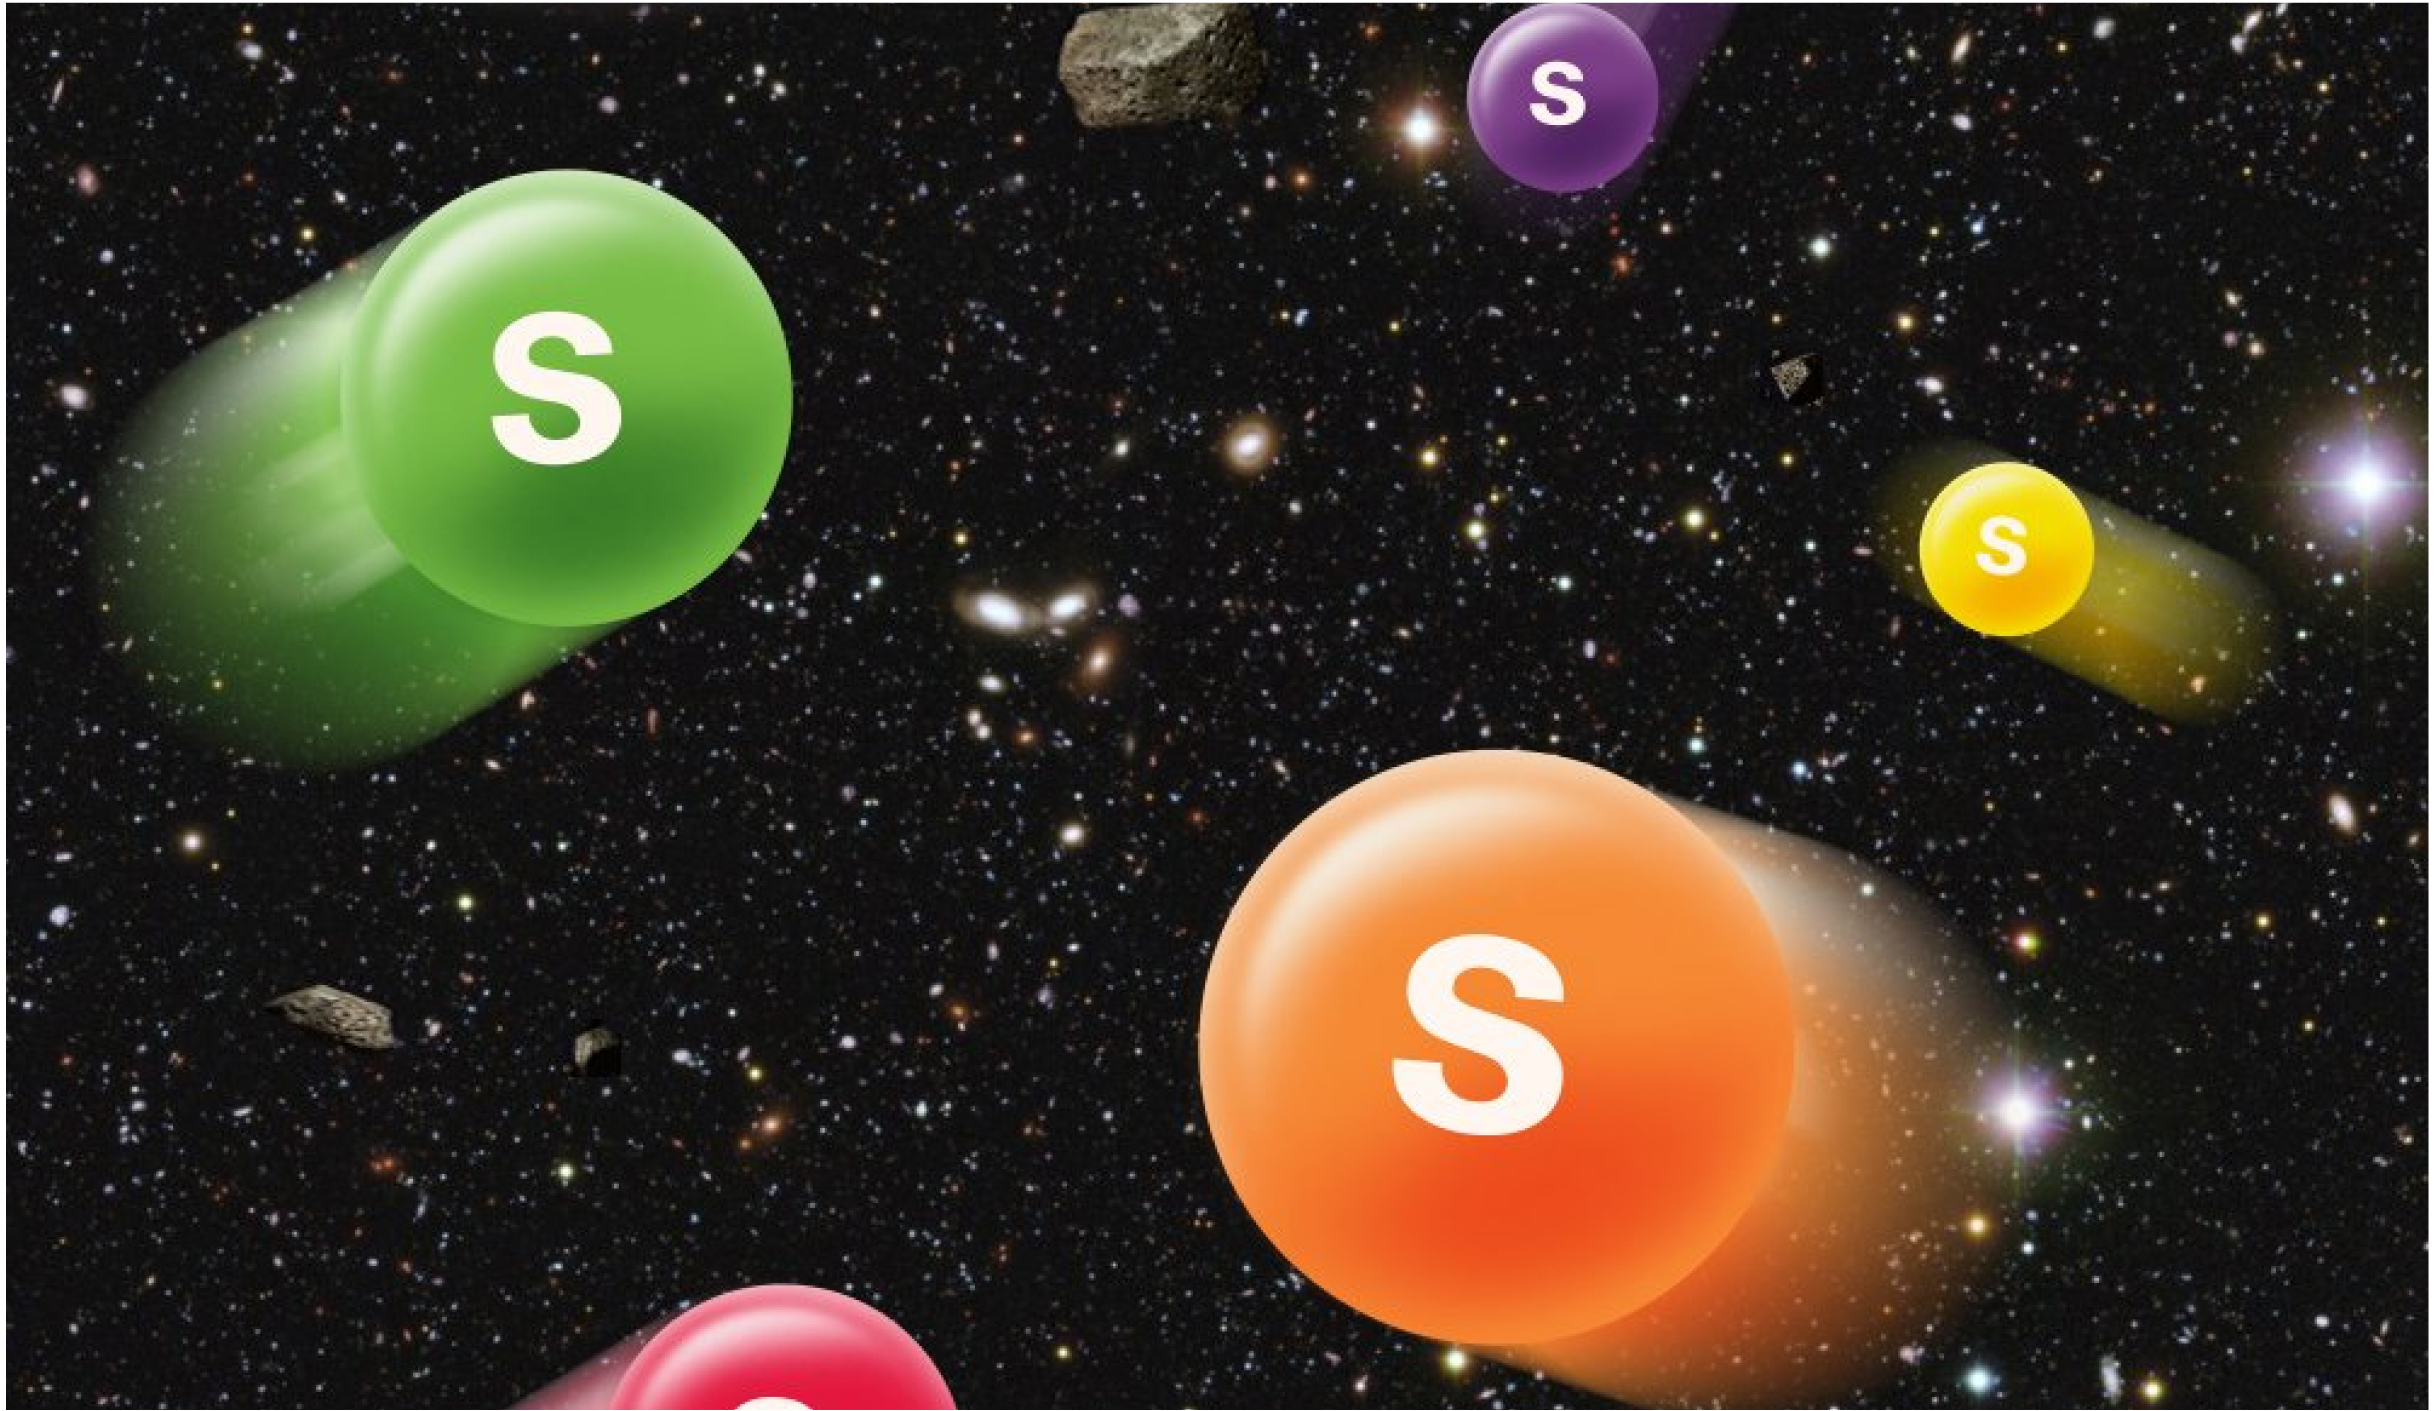 Skittles lentils zooming through the galaxy 